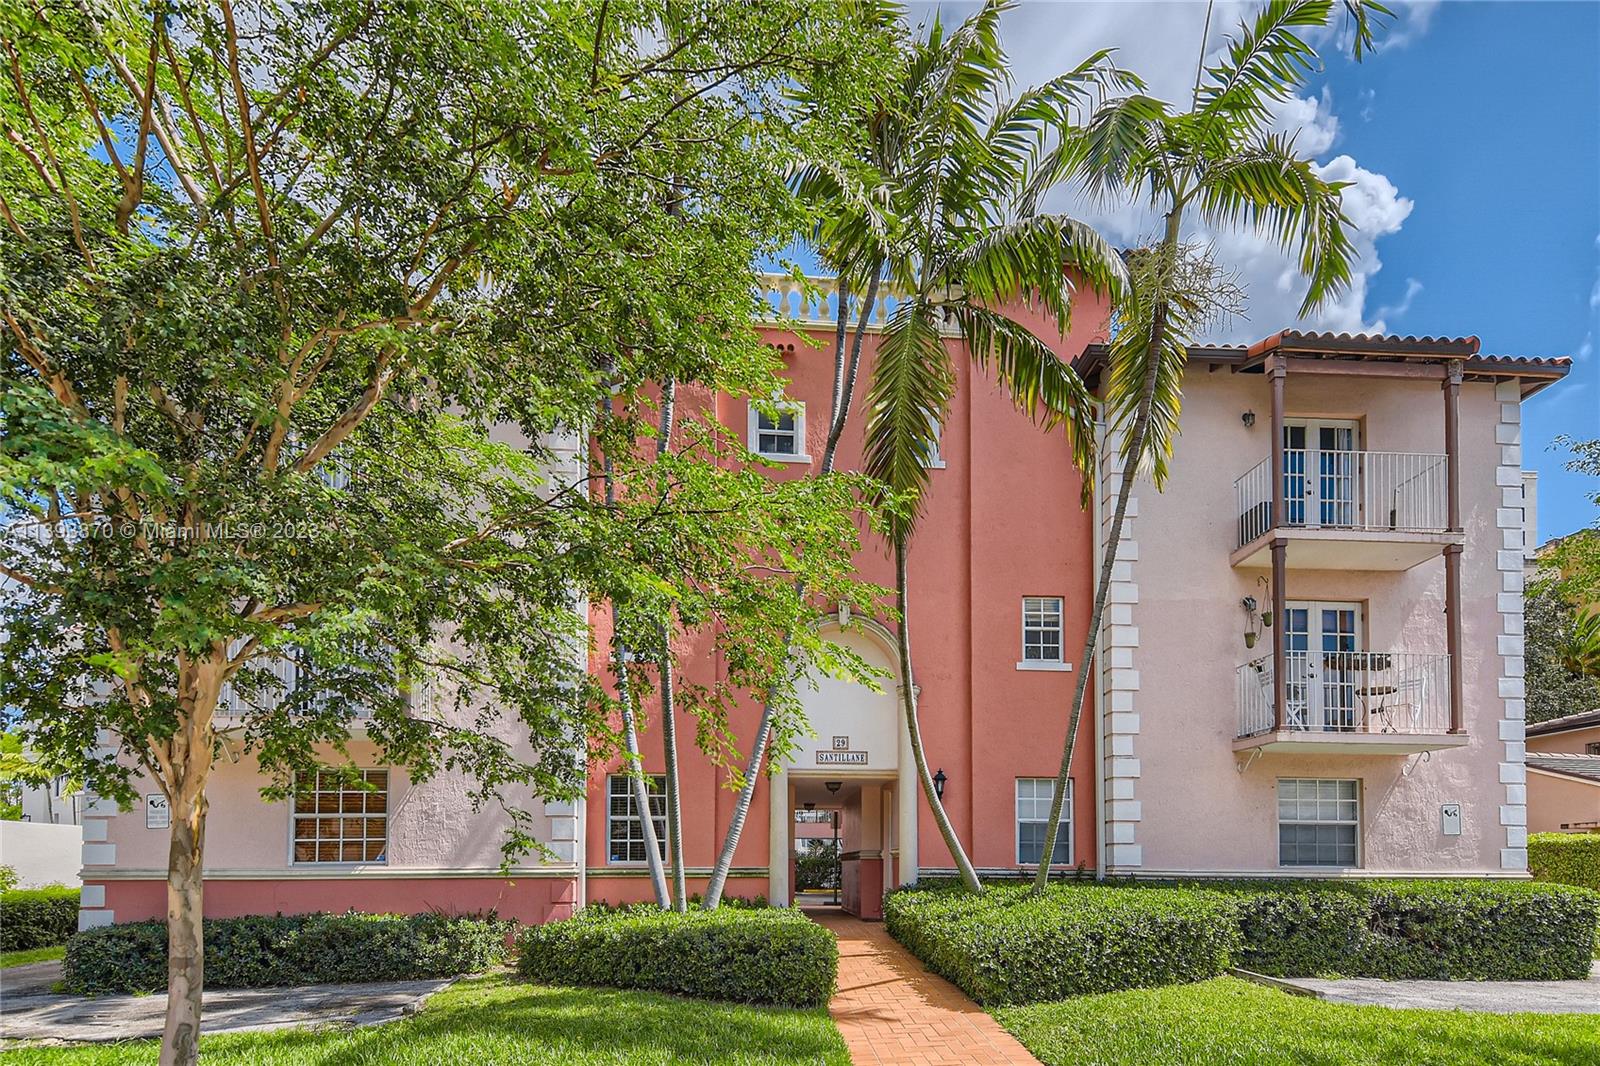 First floor 2/2 unit inside a beautiful and quaint boutique building in the heart of Coral Gables!   Unit has been freshly painted and it has one assigned parking space in front of the unit.  Building has laundry facilities and several guest parking spaces and on-street parking. Centrally located near Village of Merrick Park, Publix, Trader Joe's Miracle Mils. Dogs ok up to 20 lbs. with non refundable pet deposit. Ready for move in!